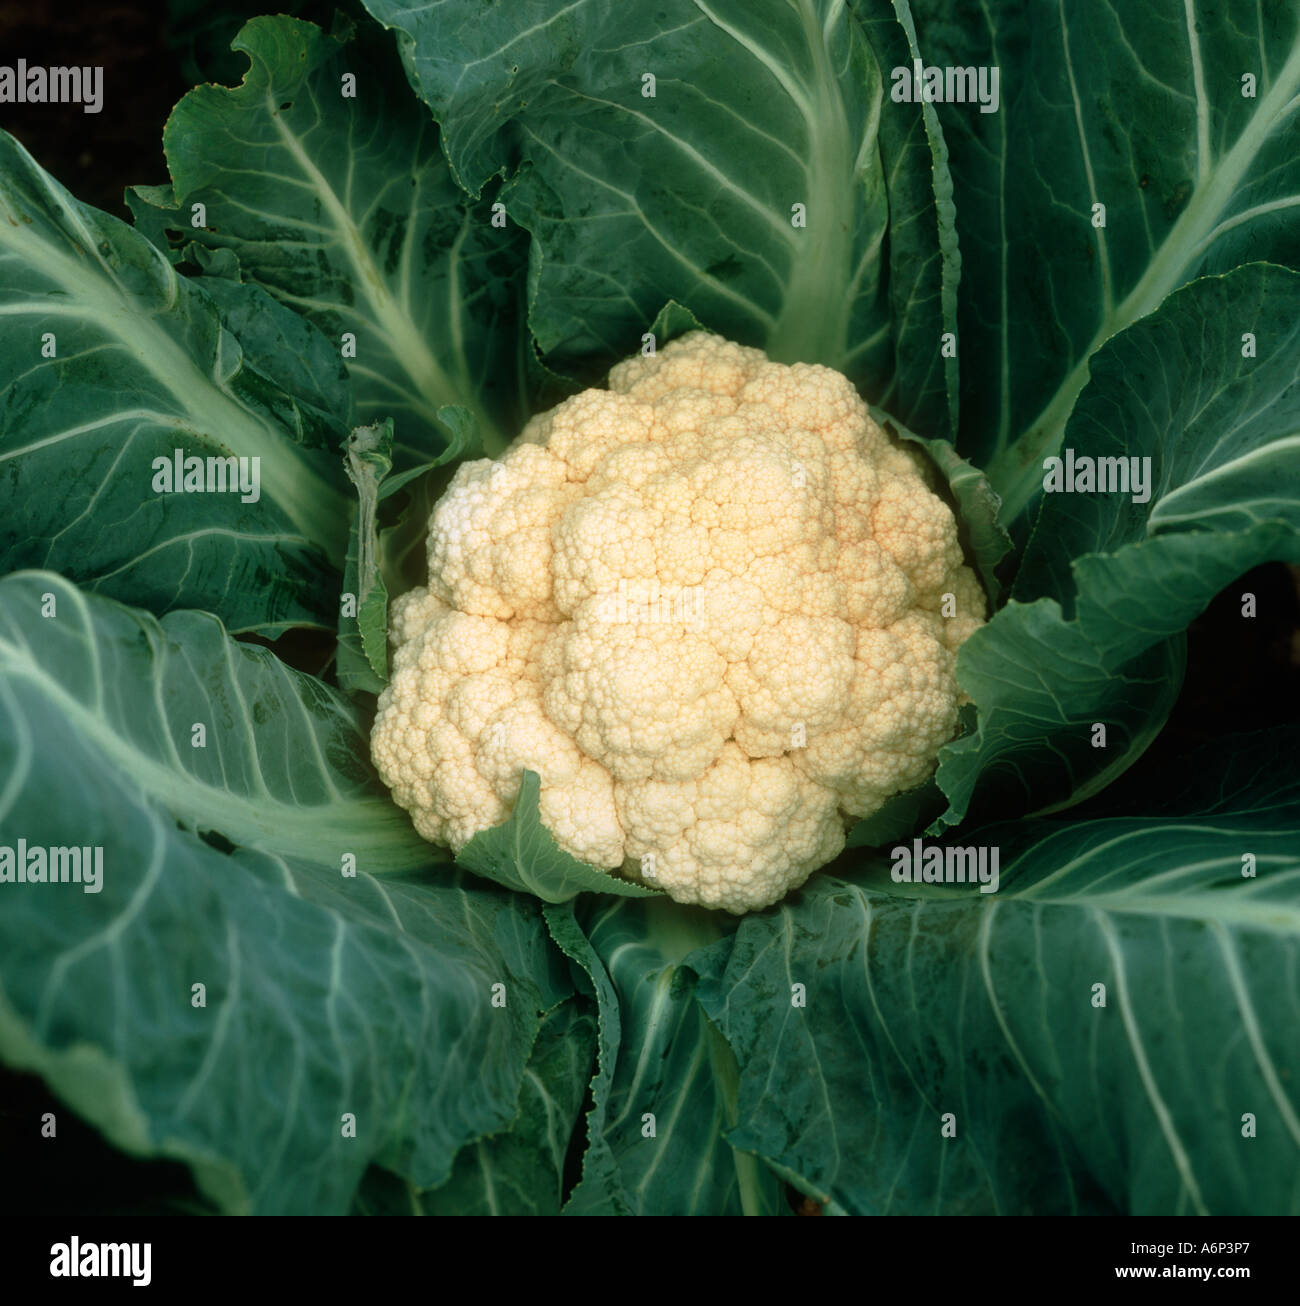 Cauliflower mature curd on field plant protected by brassica leaves Stock Photo